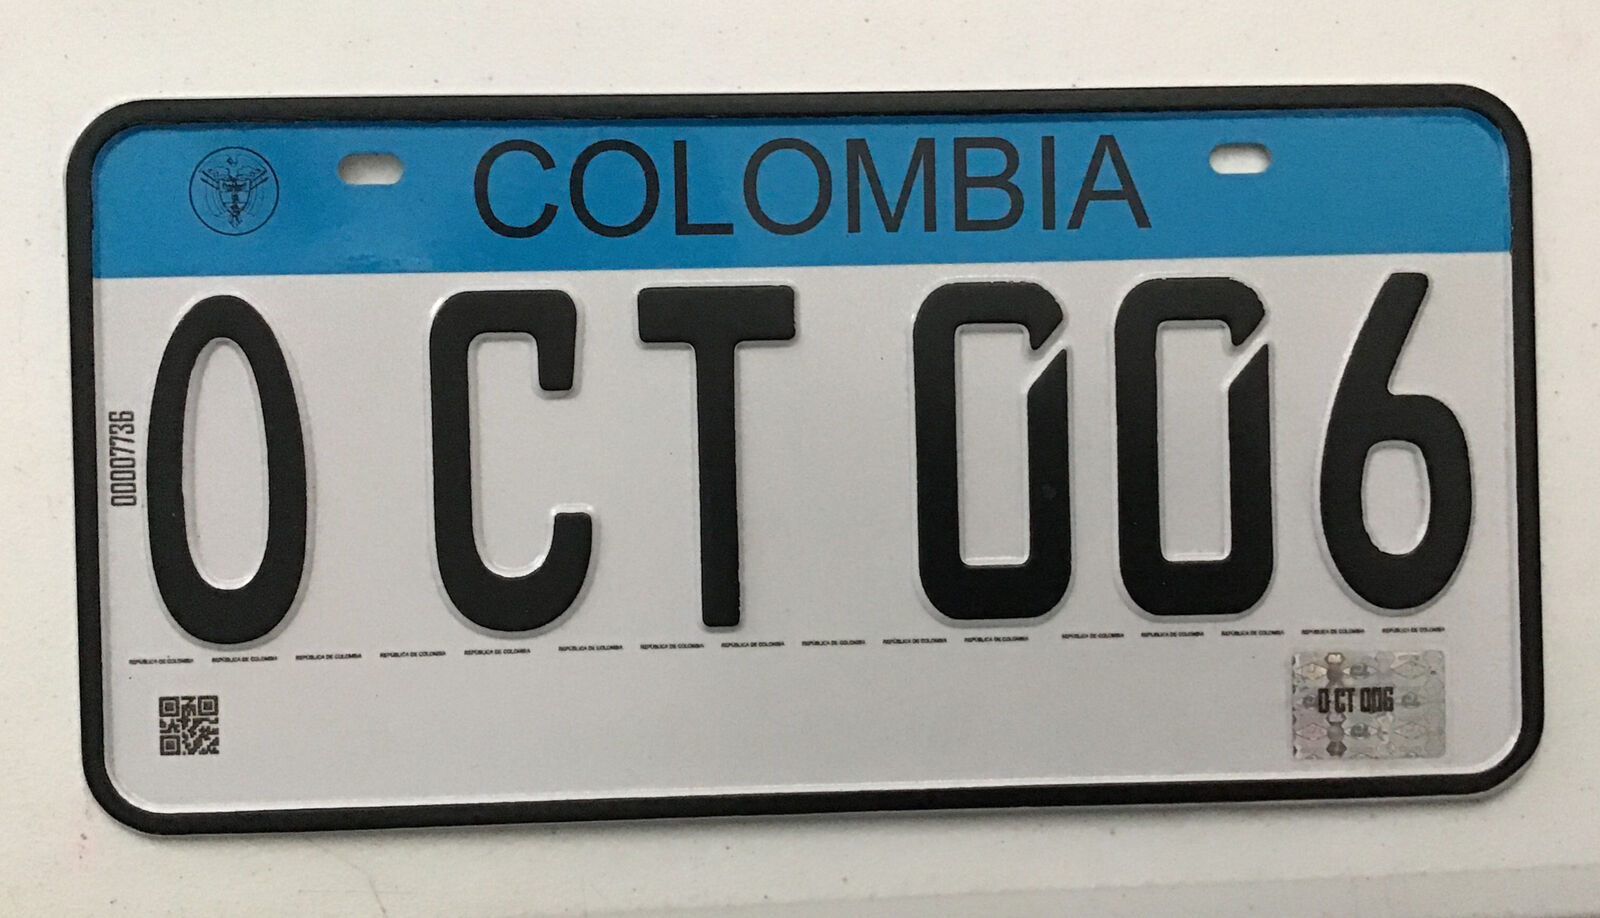 COLOMBIA, SOUTH AMERICA LICENSE PLATE - OCT 006 MINT CONDITION *RARE